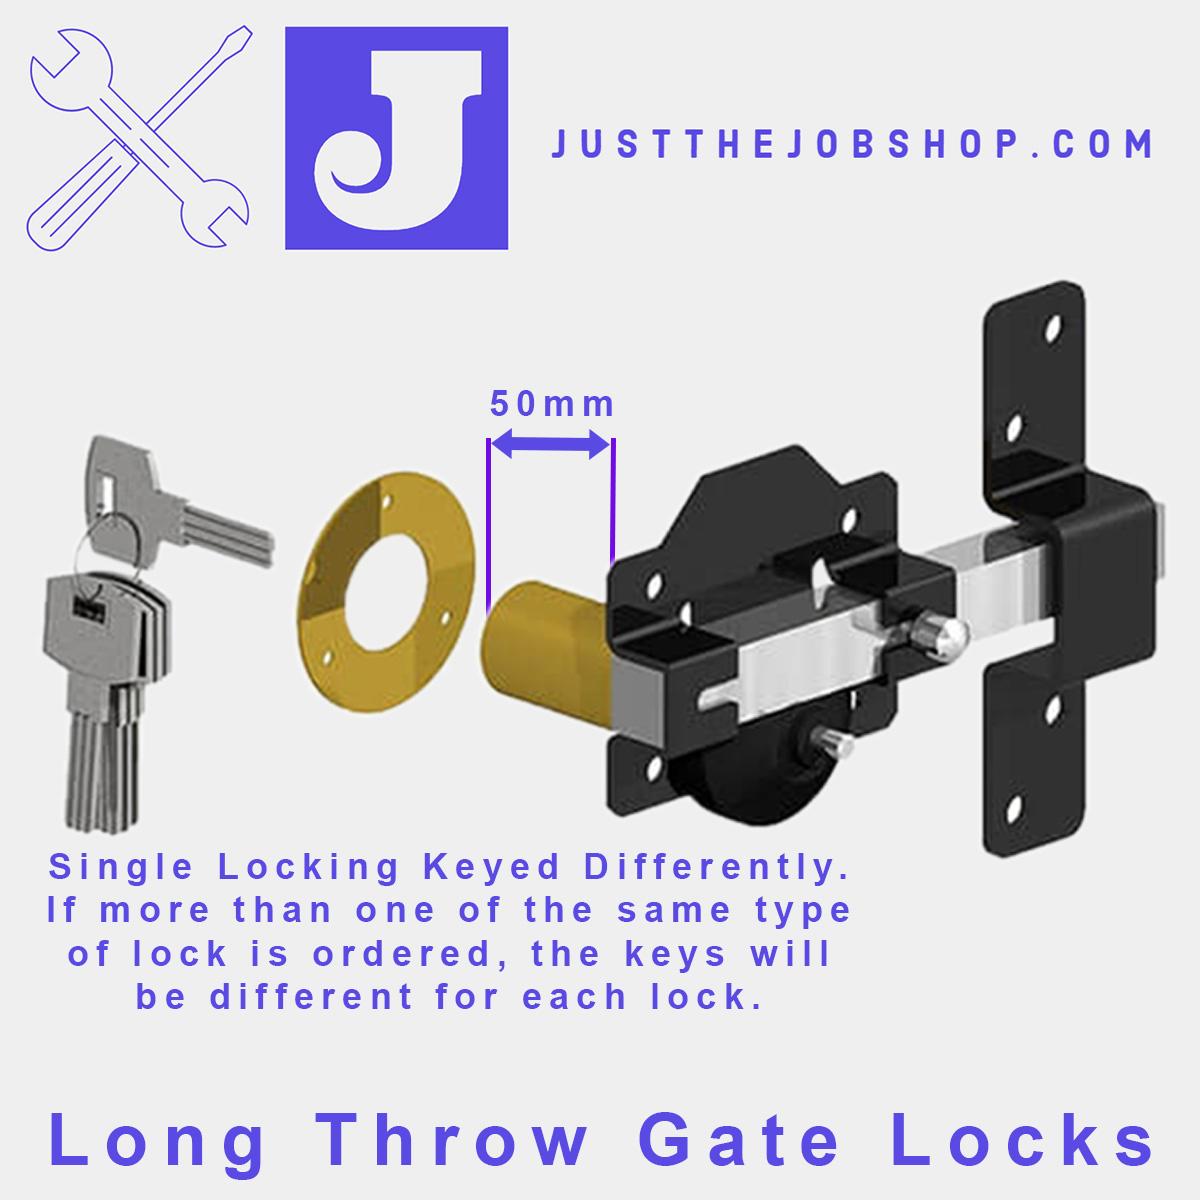 Gatemate 70mm Security Rim Lock for Garden Gate/Shed Long Throw Bar with Handle 